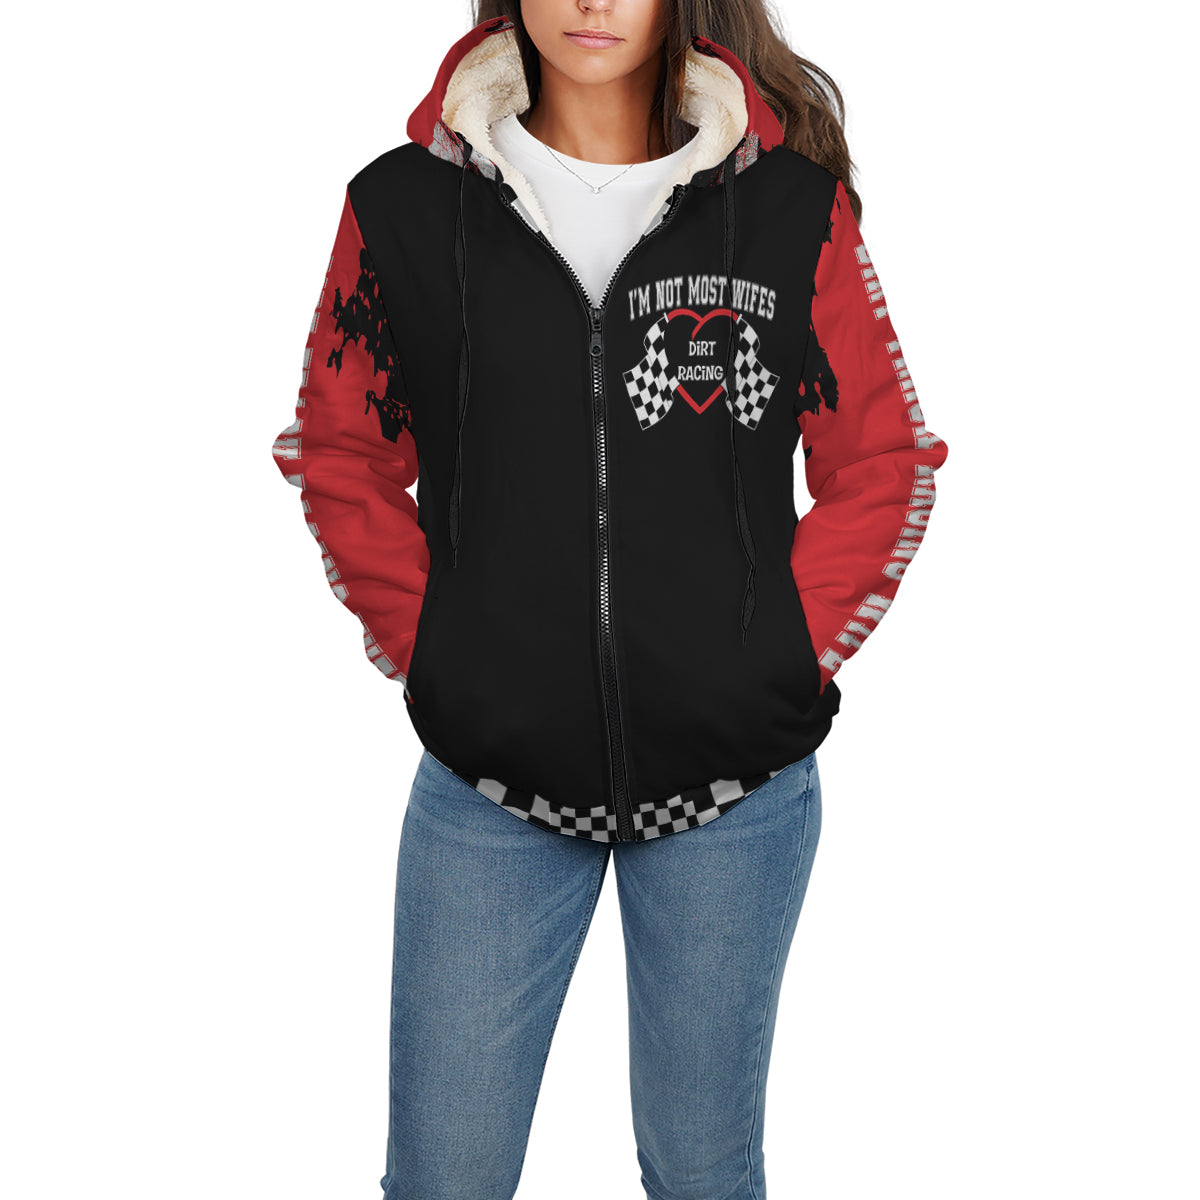 Dirt Track Racing Wife Sherpa Jacket red